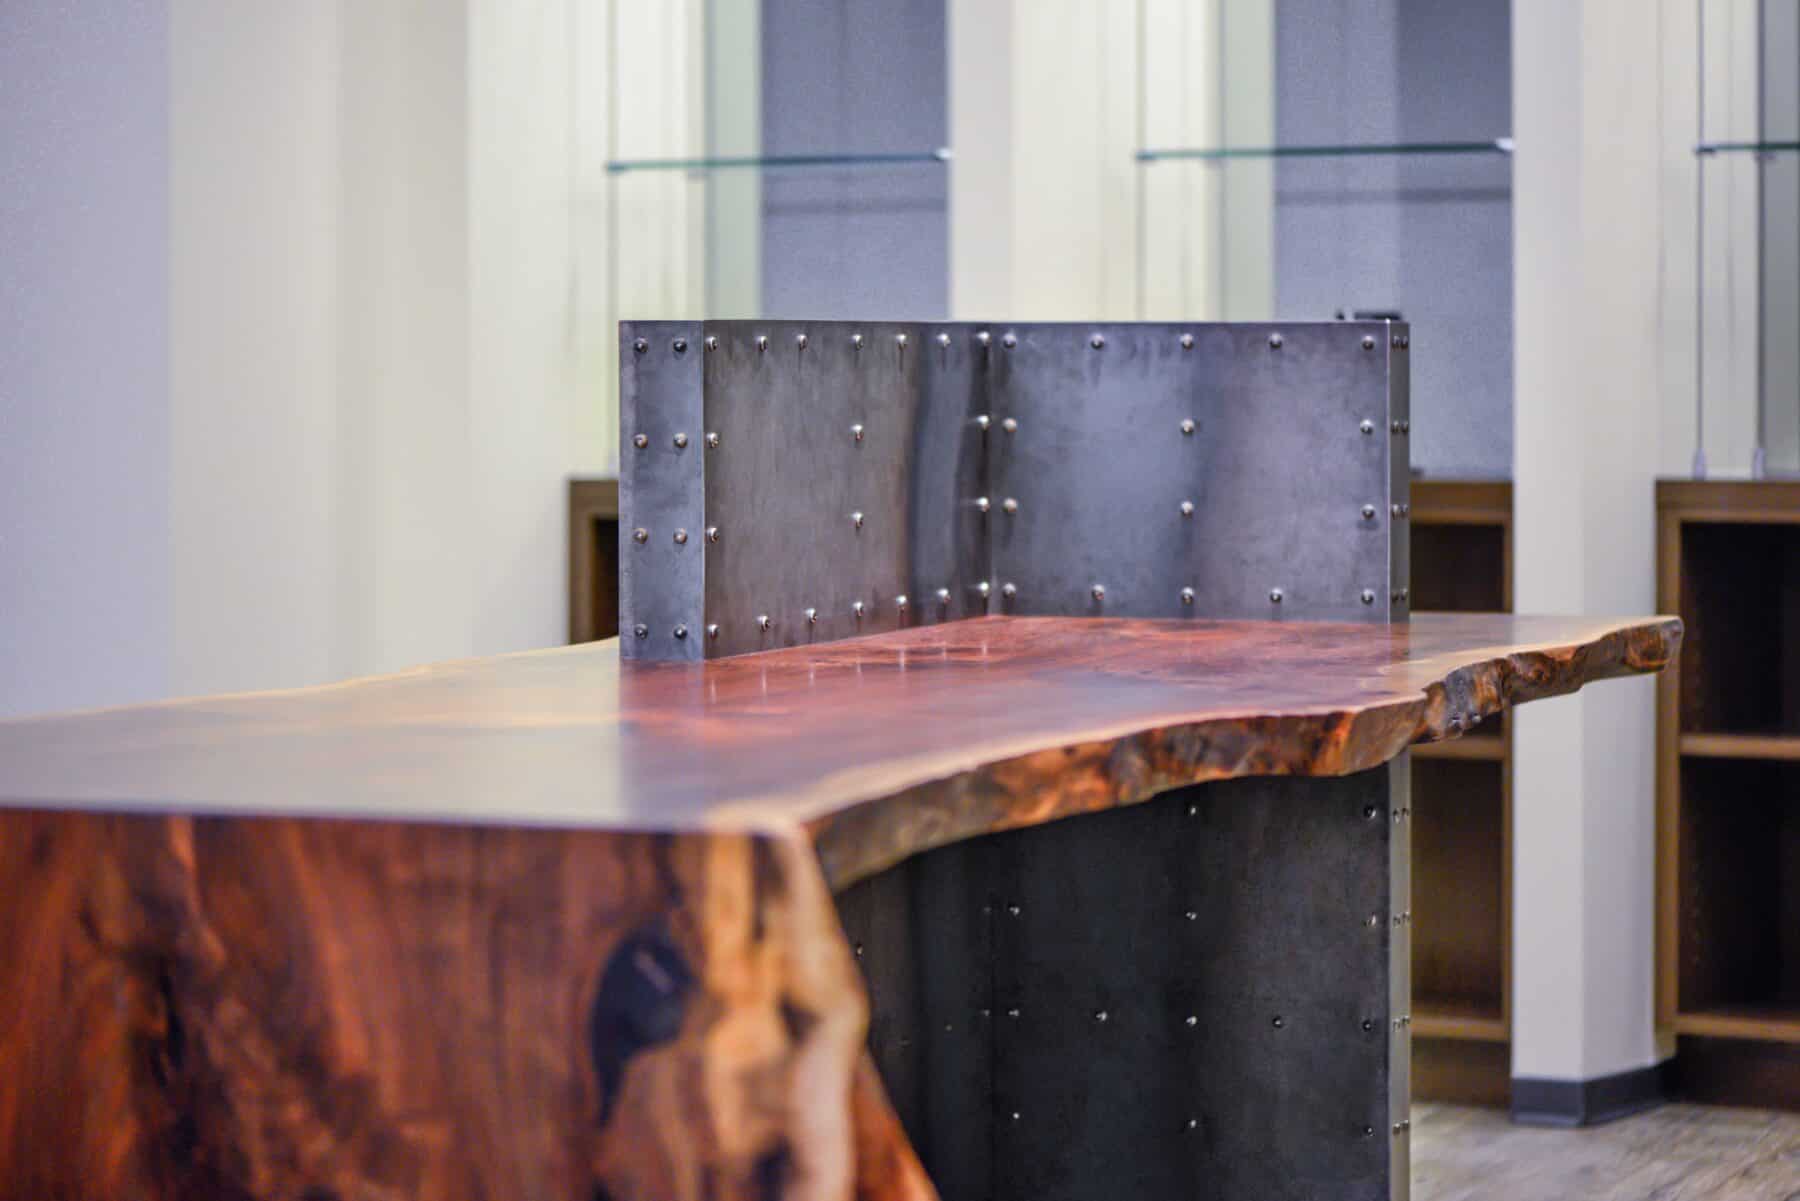 Custom Live Edge Walnut Reception Desk with Distressed Metal Base with Rivets from Construction Specialty Projects by Commercial Builder & General Contractor Structural Enterprises